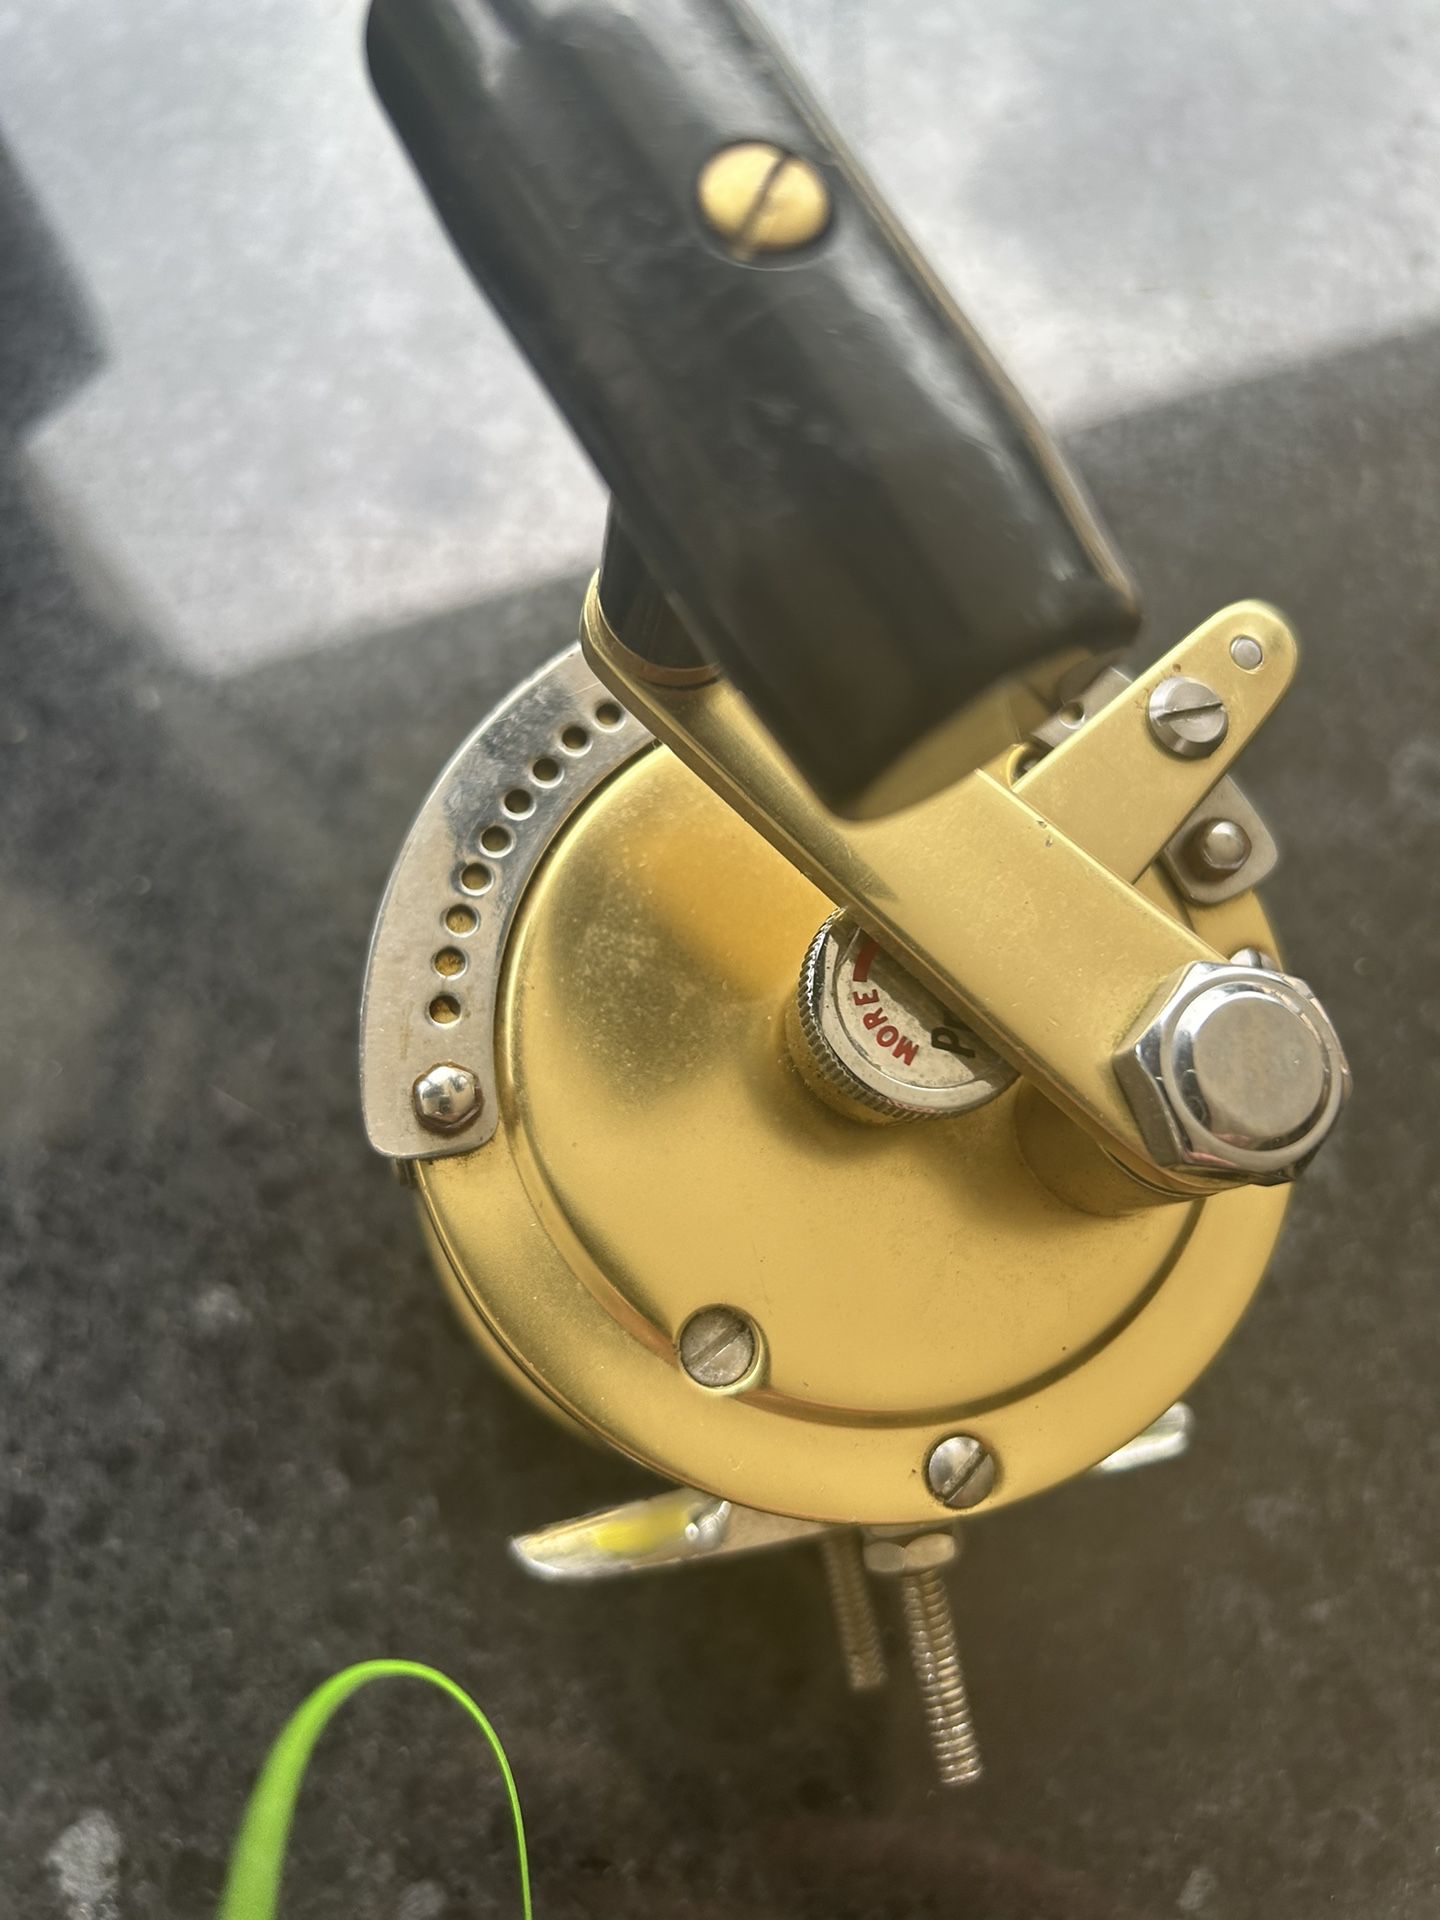 Fin-or 12/20 light off shore fishing reel for Sale in Miami, FL - OfferUp